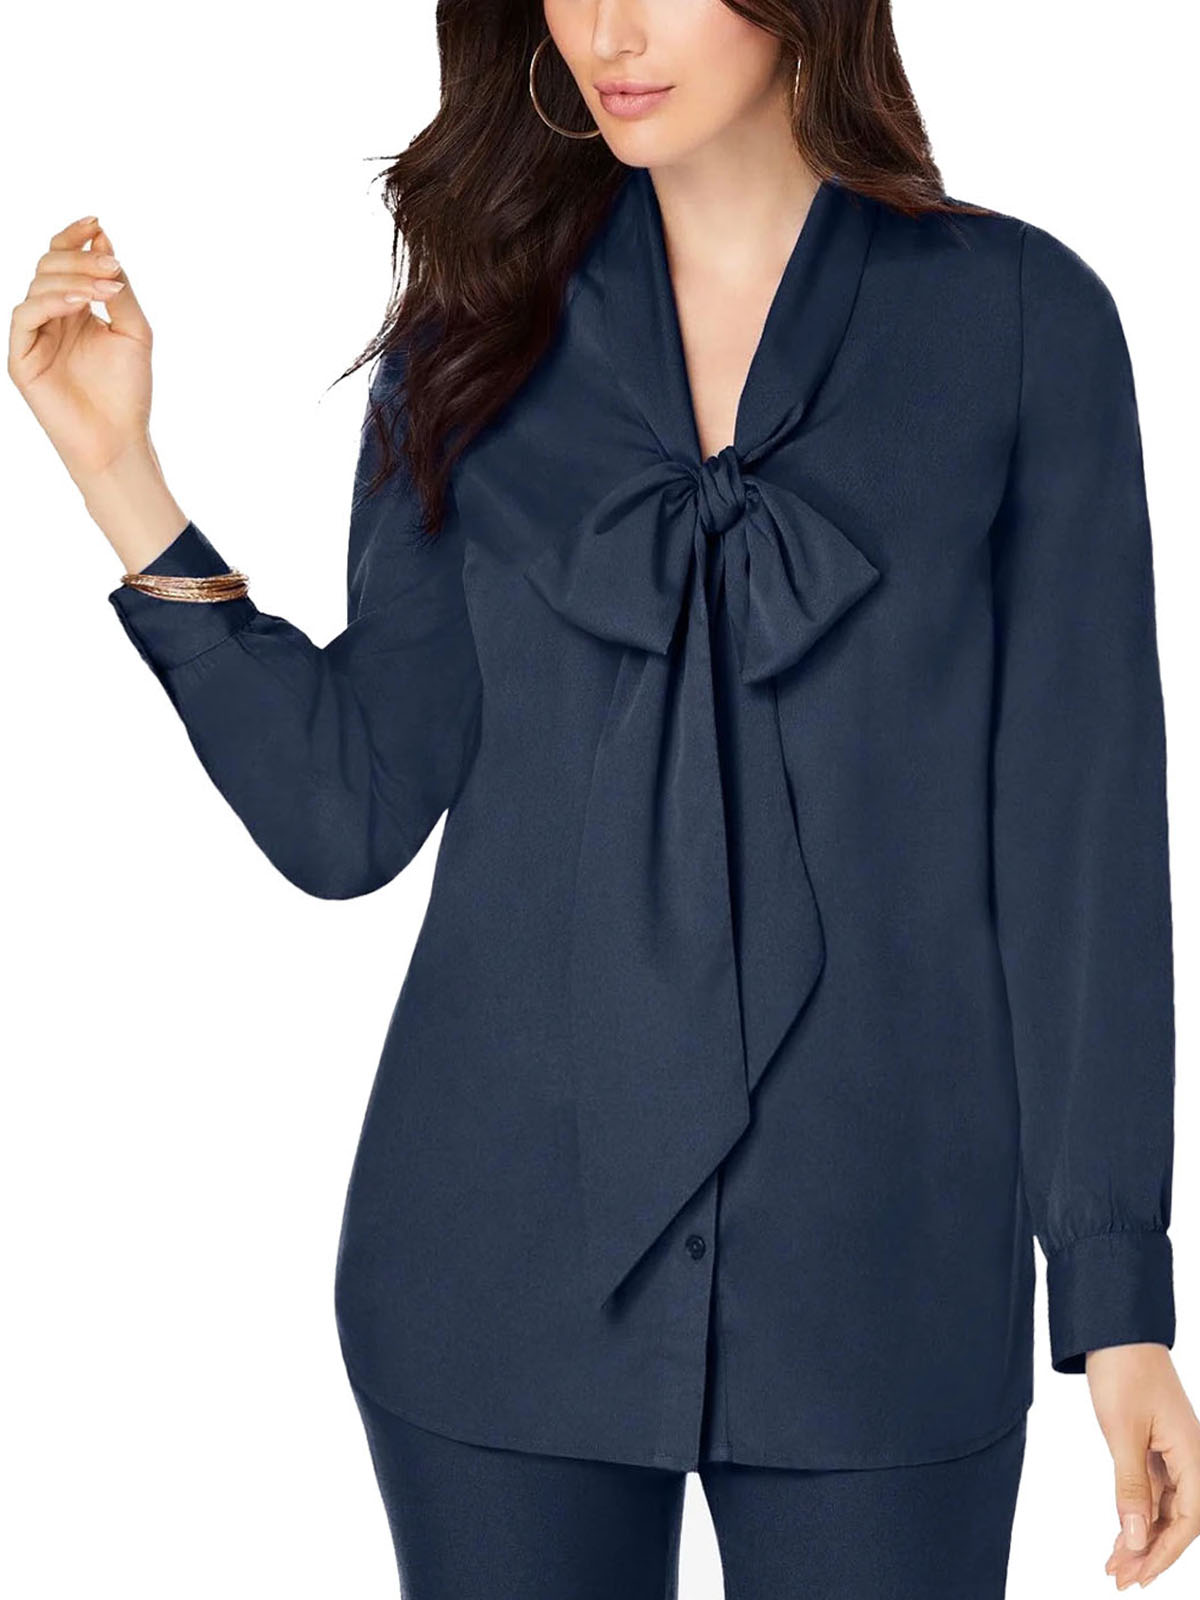 Roaman's - - NAVY Long Sleeve Bow Blouse - Plus Size 16 to 24 (US